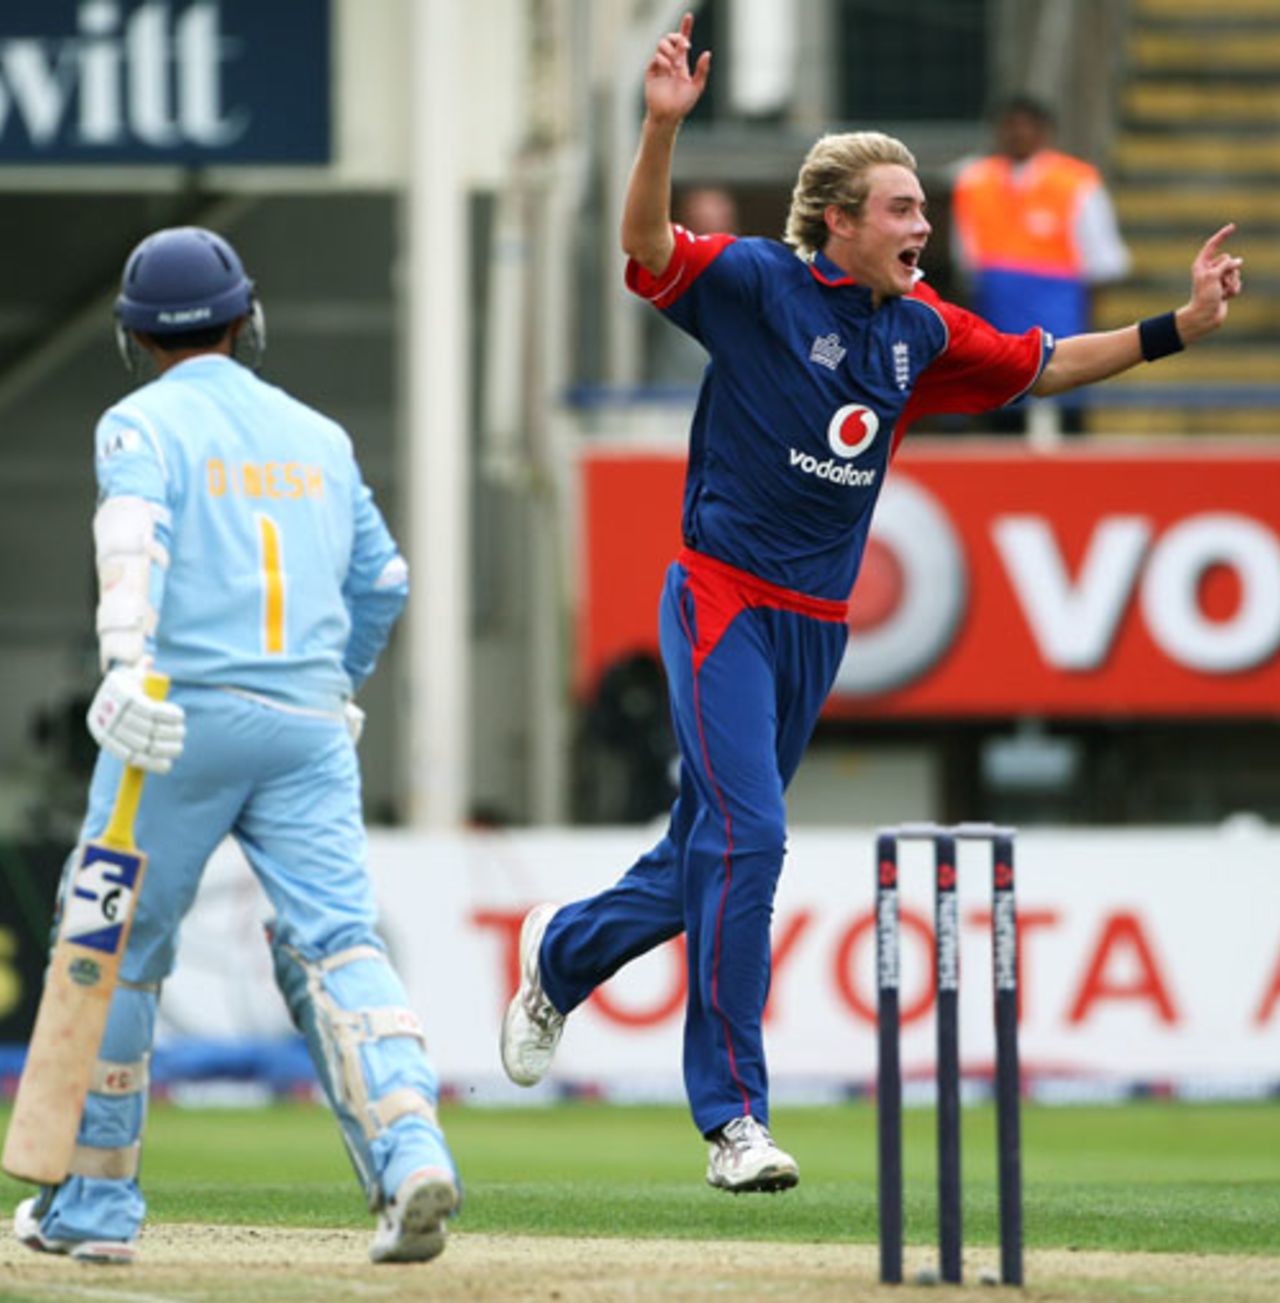 Stuart Broad is excited after removing Dinesh Karthik for a second-ball duck, England v India, 3rd ODI, Edgbaston, August 27, 2007